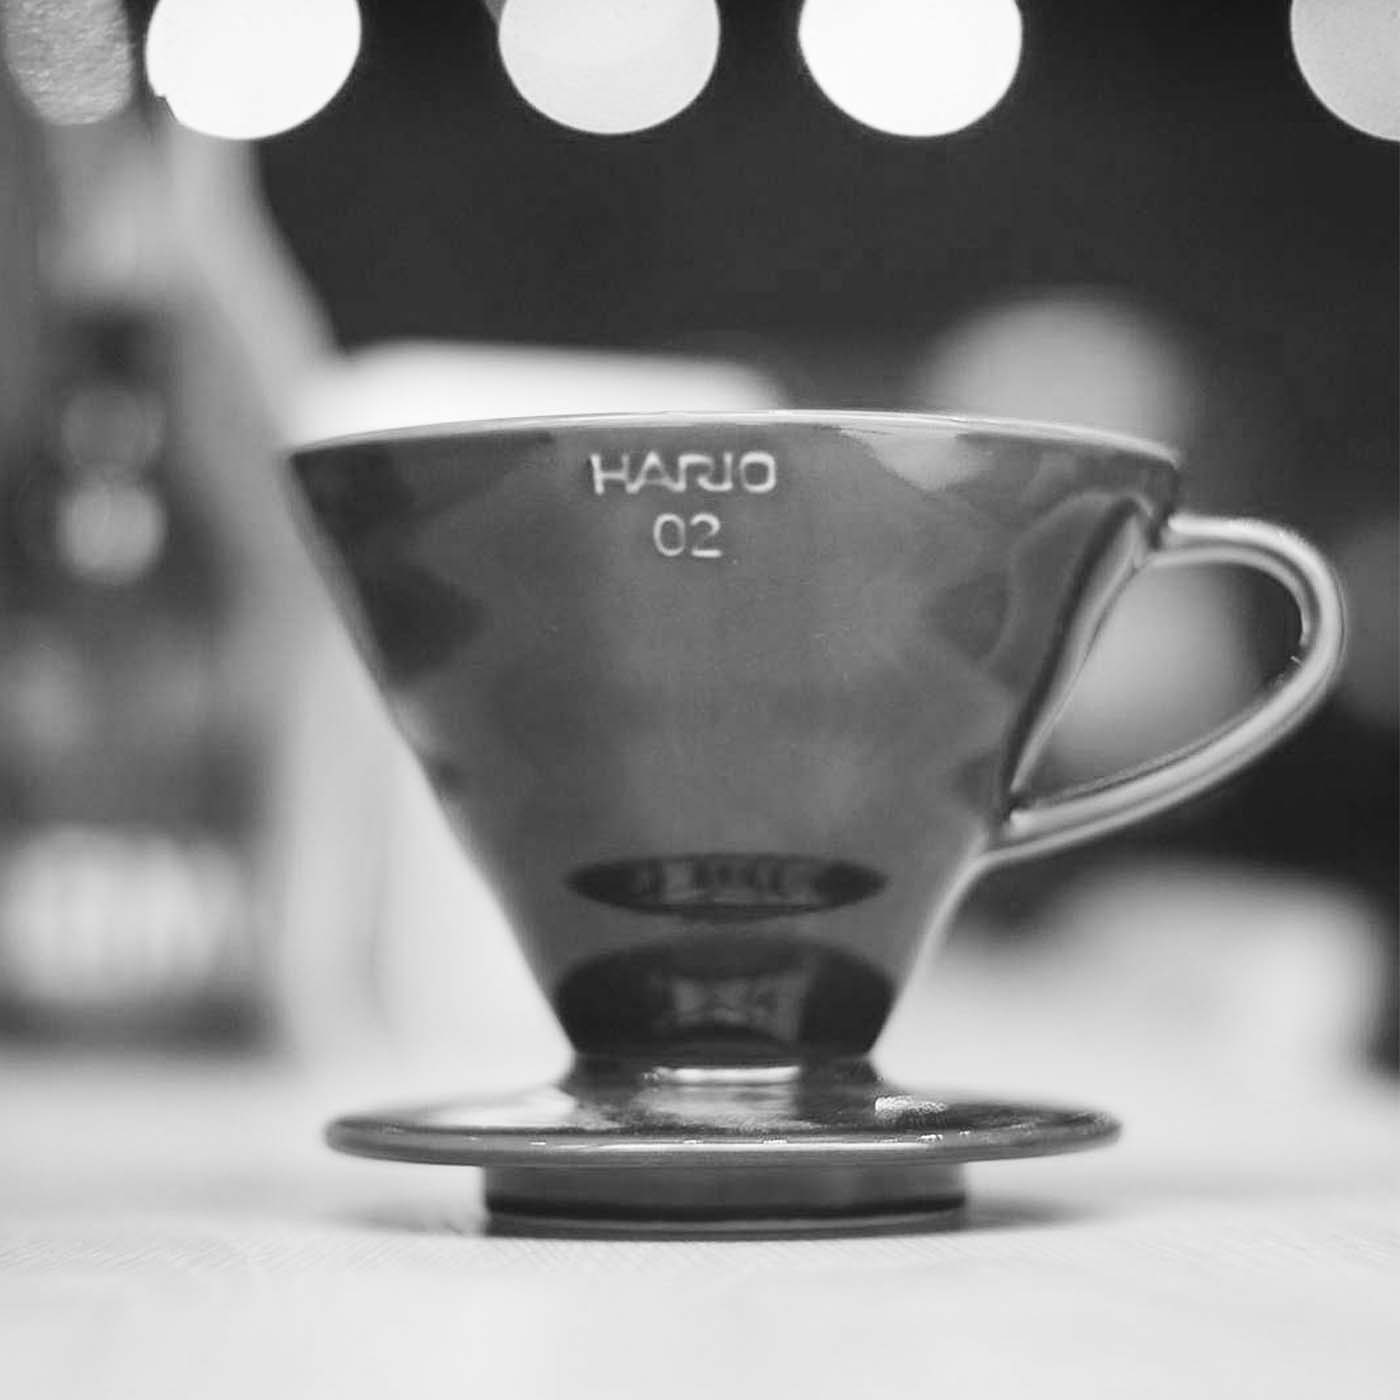 Buy coffee brewing gear or tea brewing gear online at BEAR. You can buy hand brewing coffee equipment online, from hand grinders to V60's or SAGE espresso machines